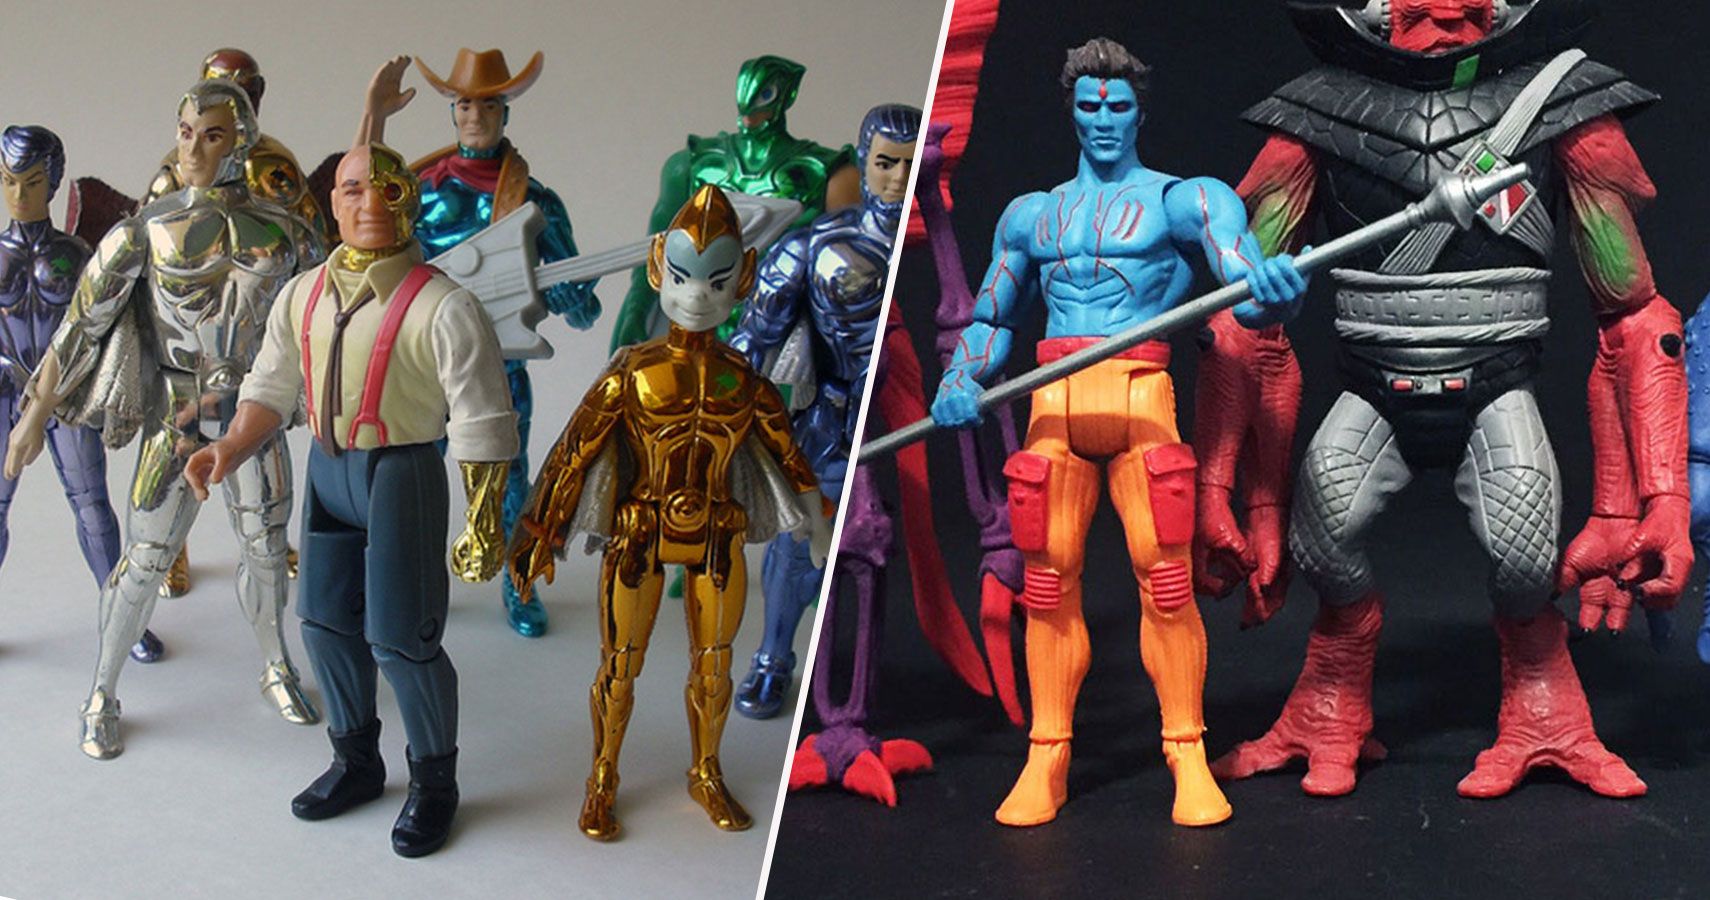 25 Toy Lines From the '80s Collectors 